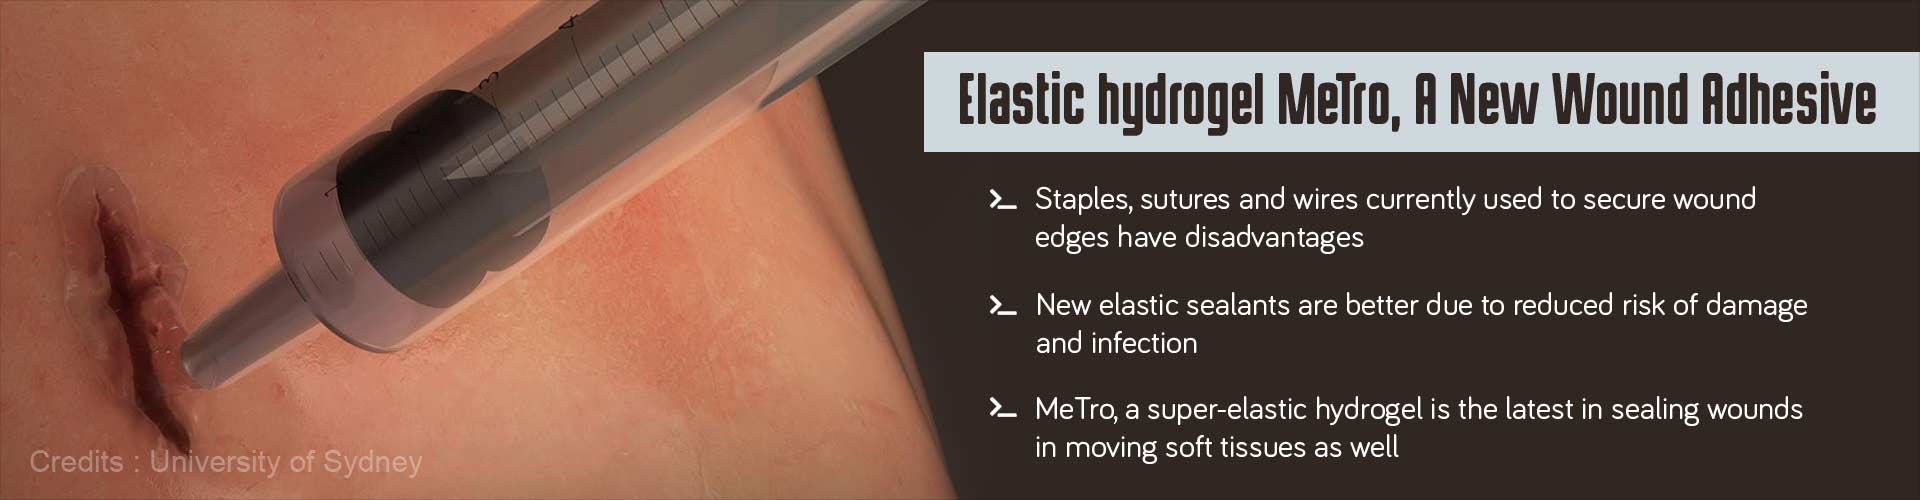 Elastic hydrogel MeTro, a new wound adhesive
- Staples, sutures and wires currently used to secure wound edges have disadvantages
- New elastic sealants are better due to reduced risk of damage and infection
- MeTro, a super-elastic hydrogelis the latest in sealing wounds in moving soft tissues as well